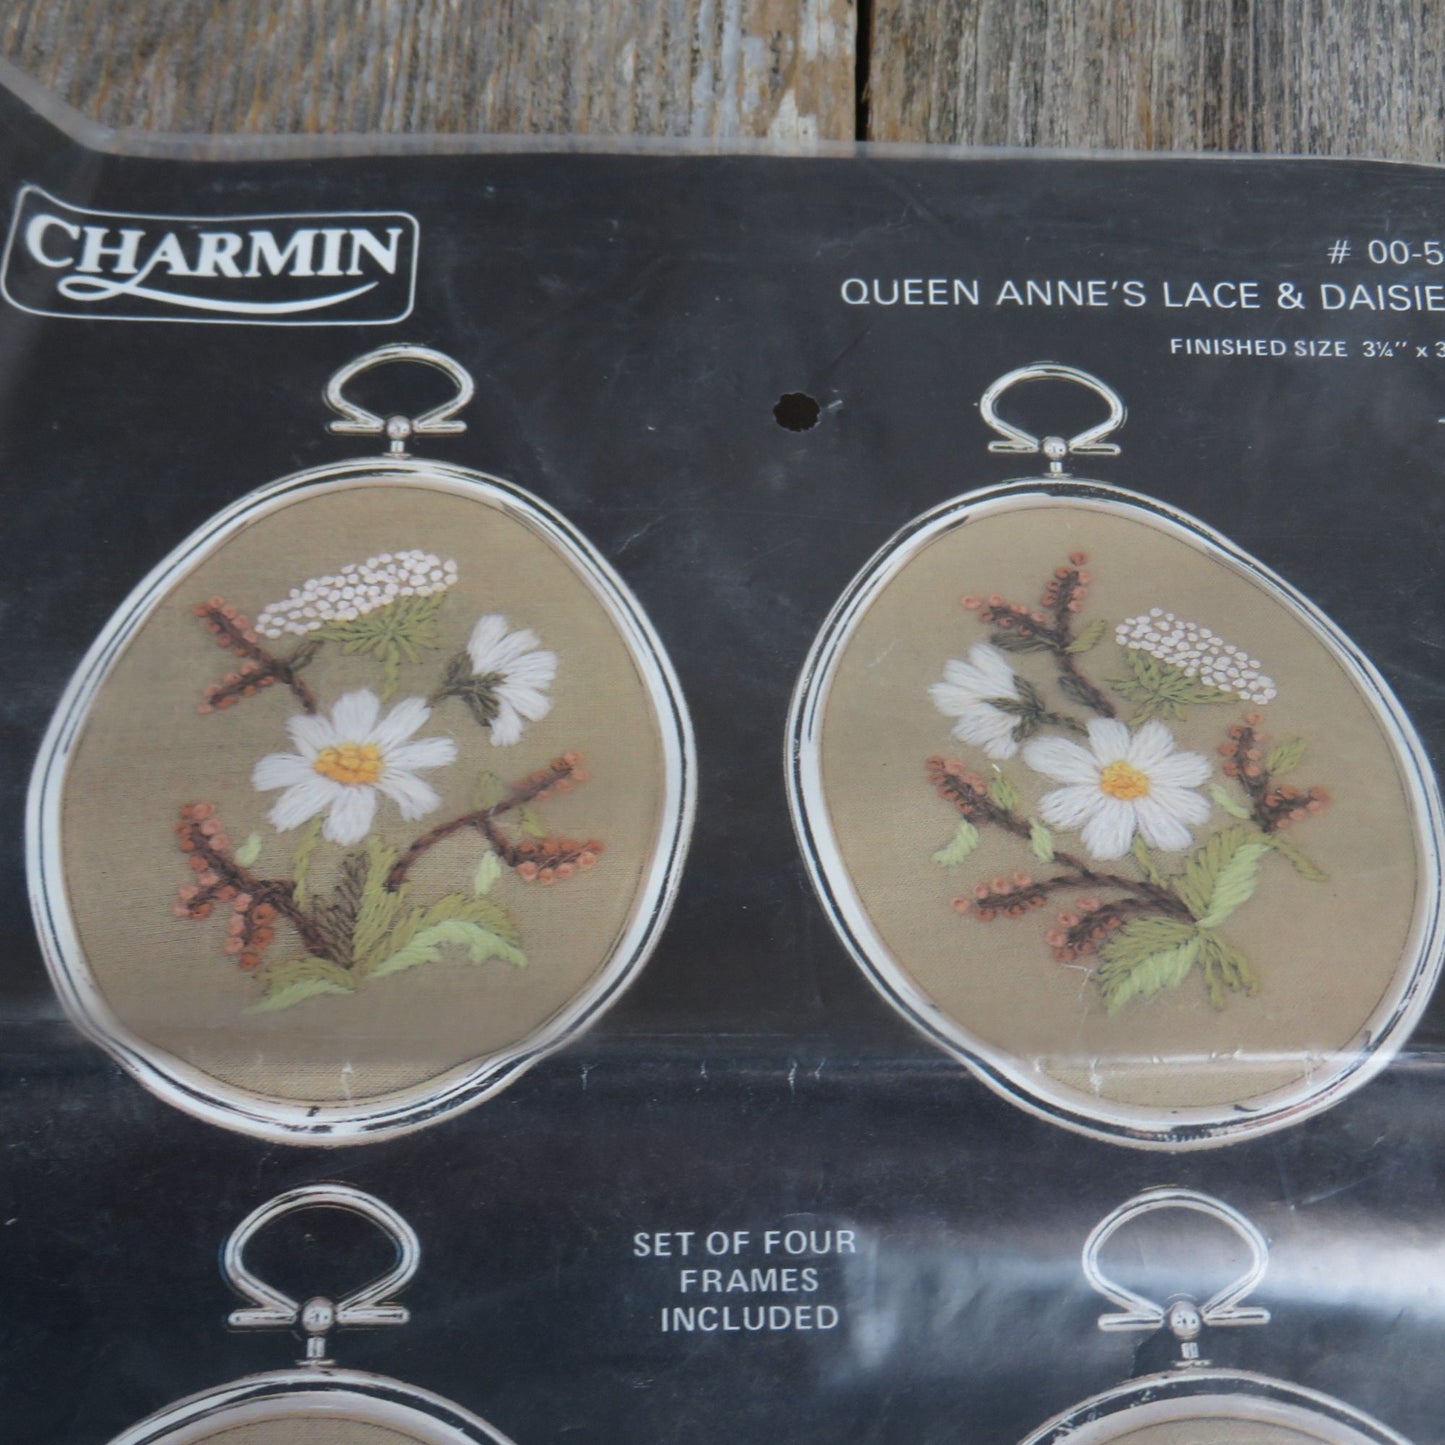 Queen Anne's Lace and Daisies Embroidery Kit Janlynn Frames Flowers Floral 00-53 Set of 4